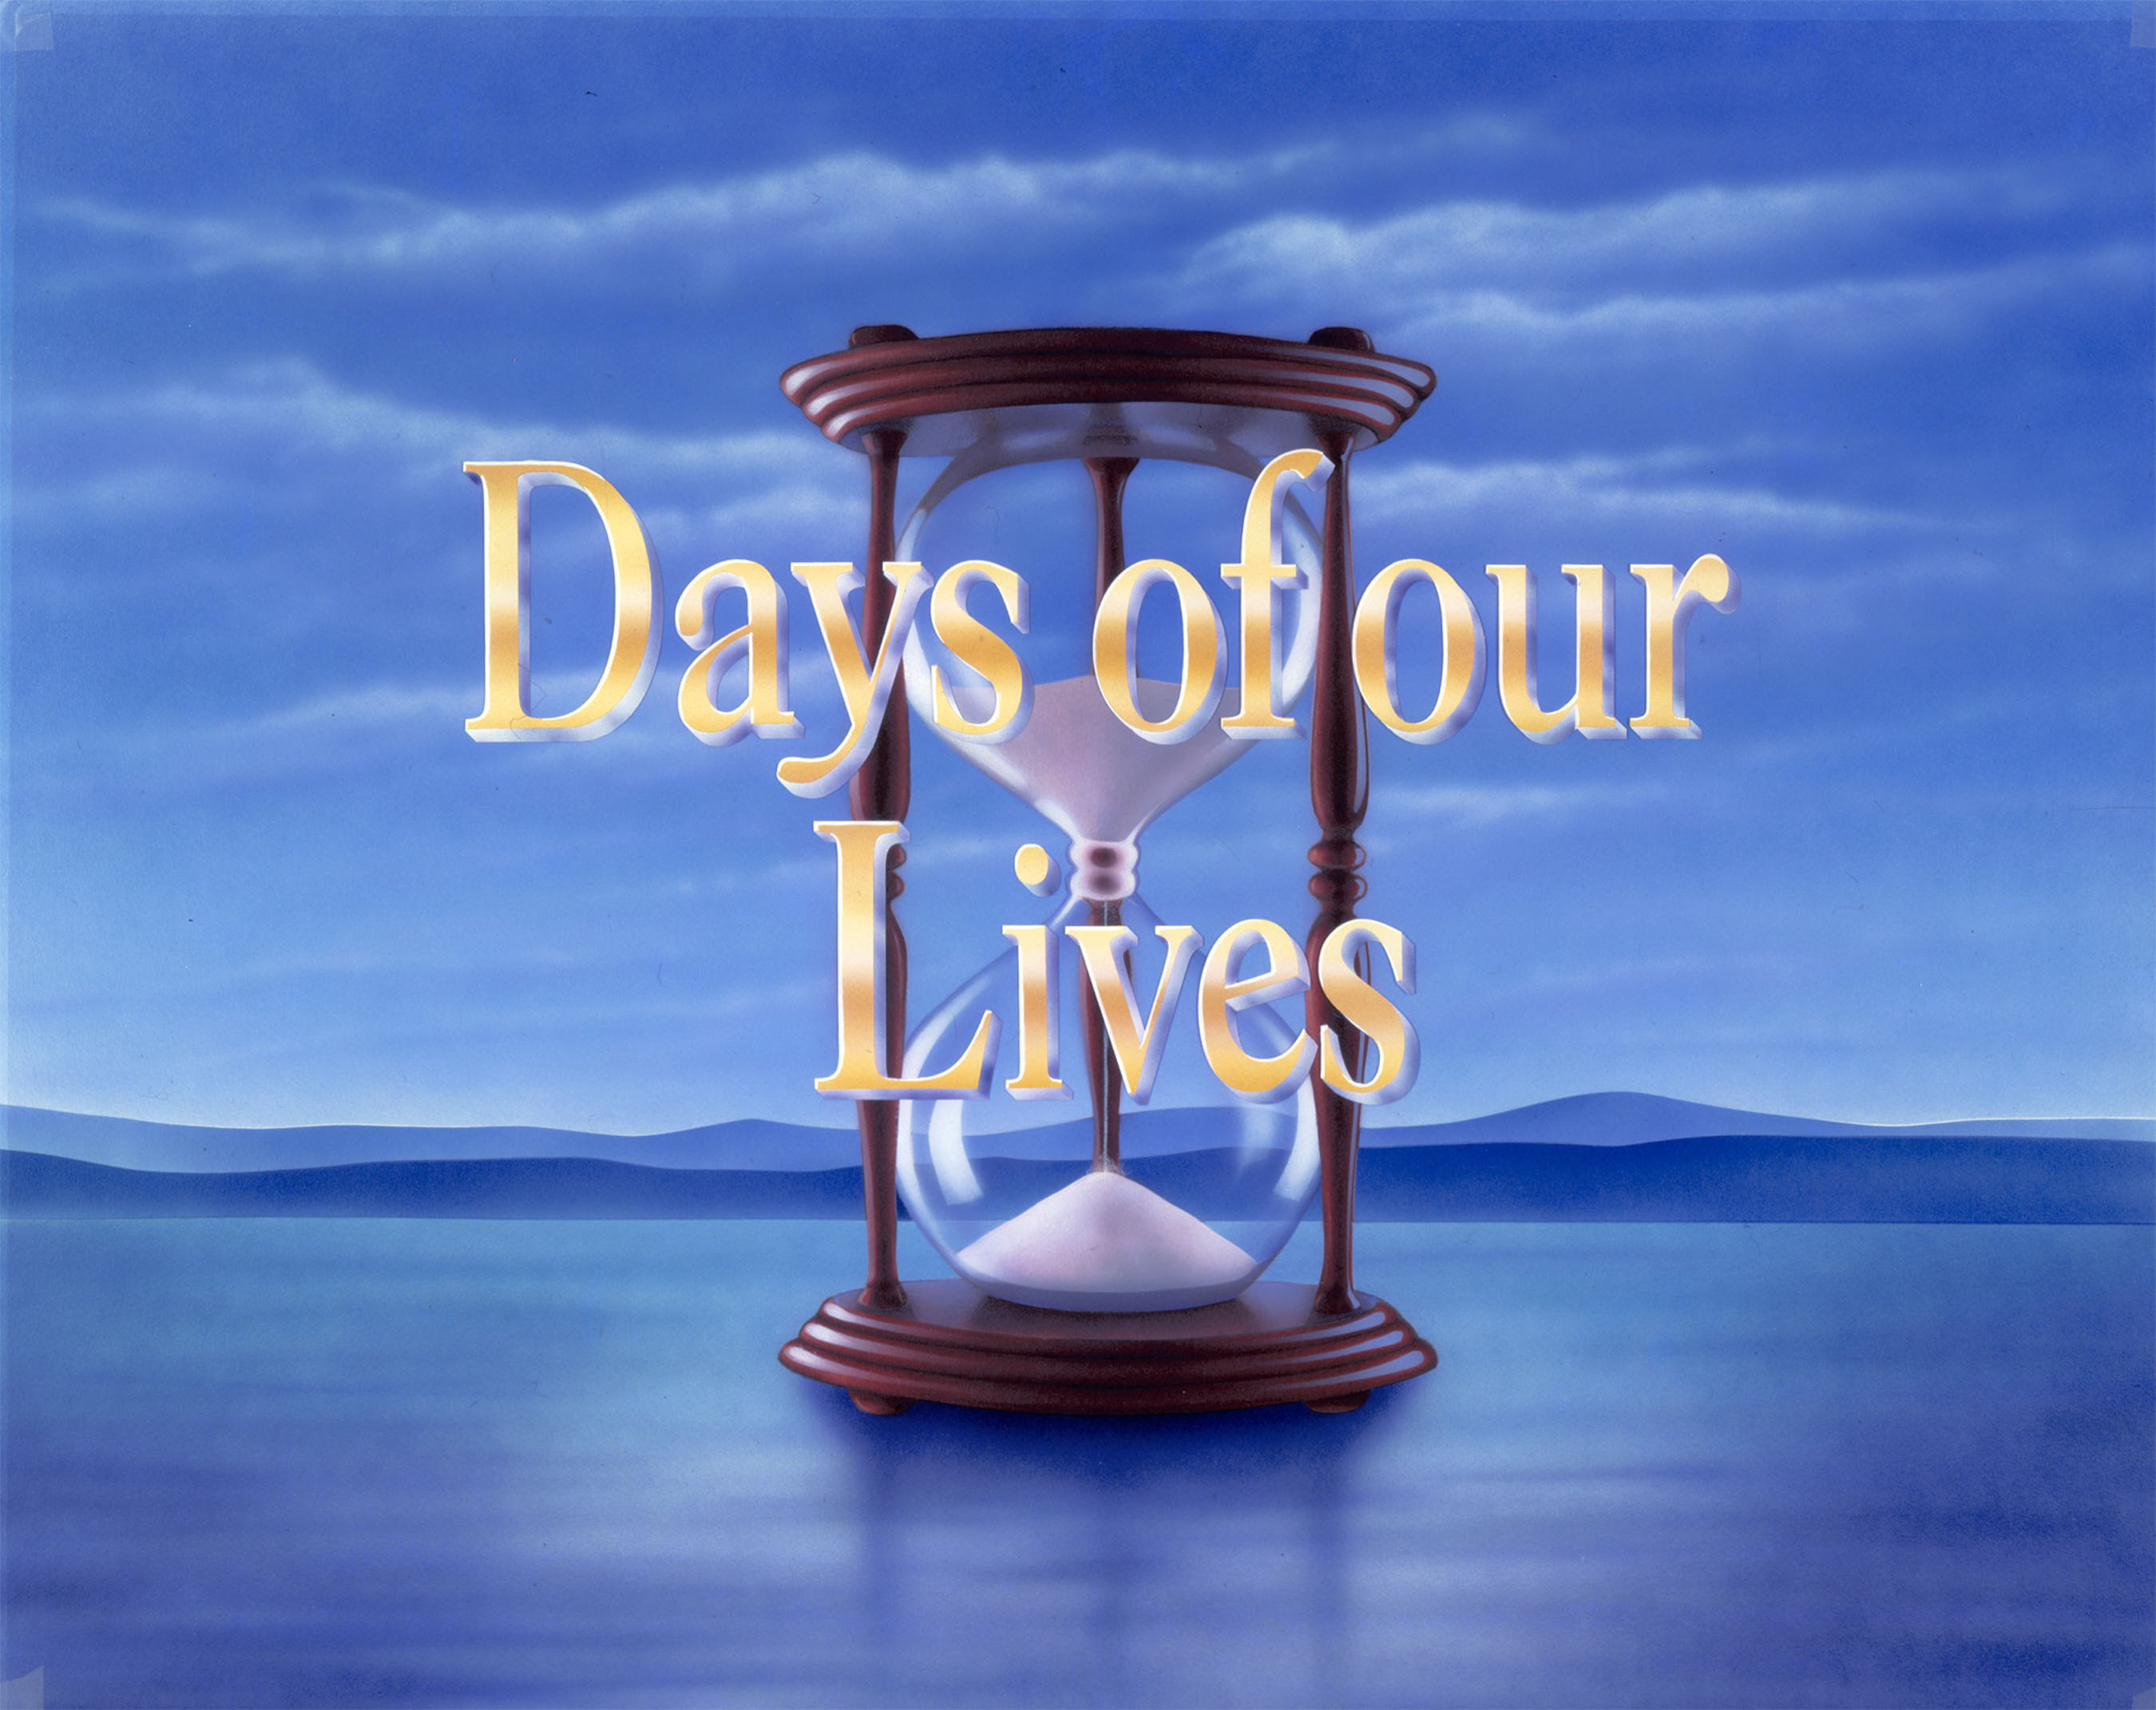 days-of-our-lives.jpg